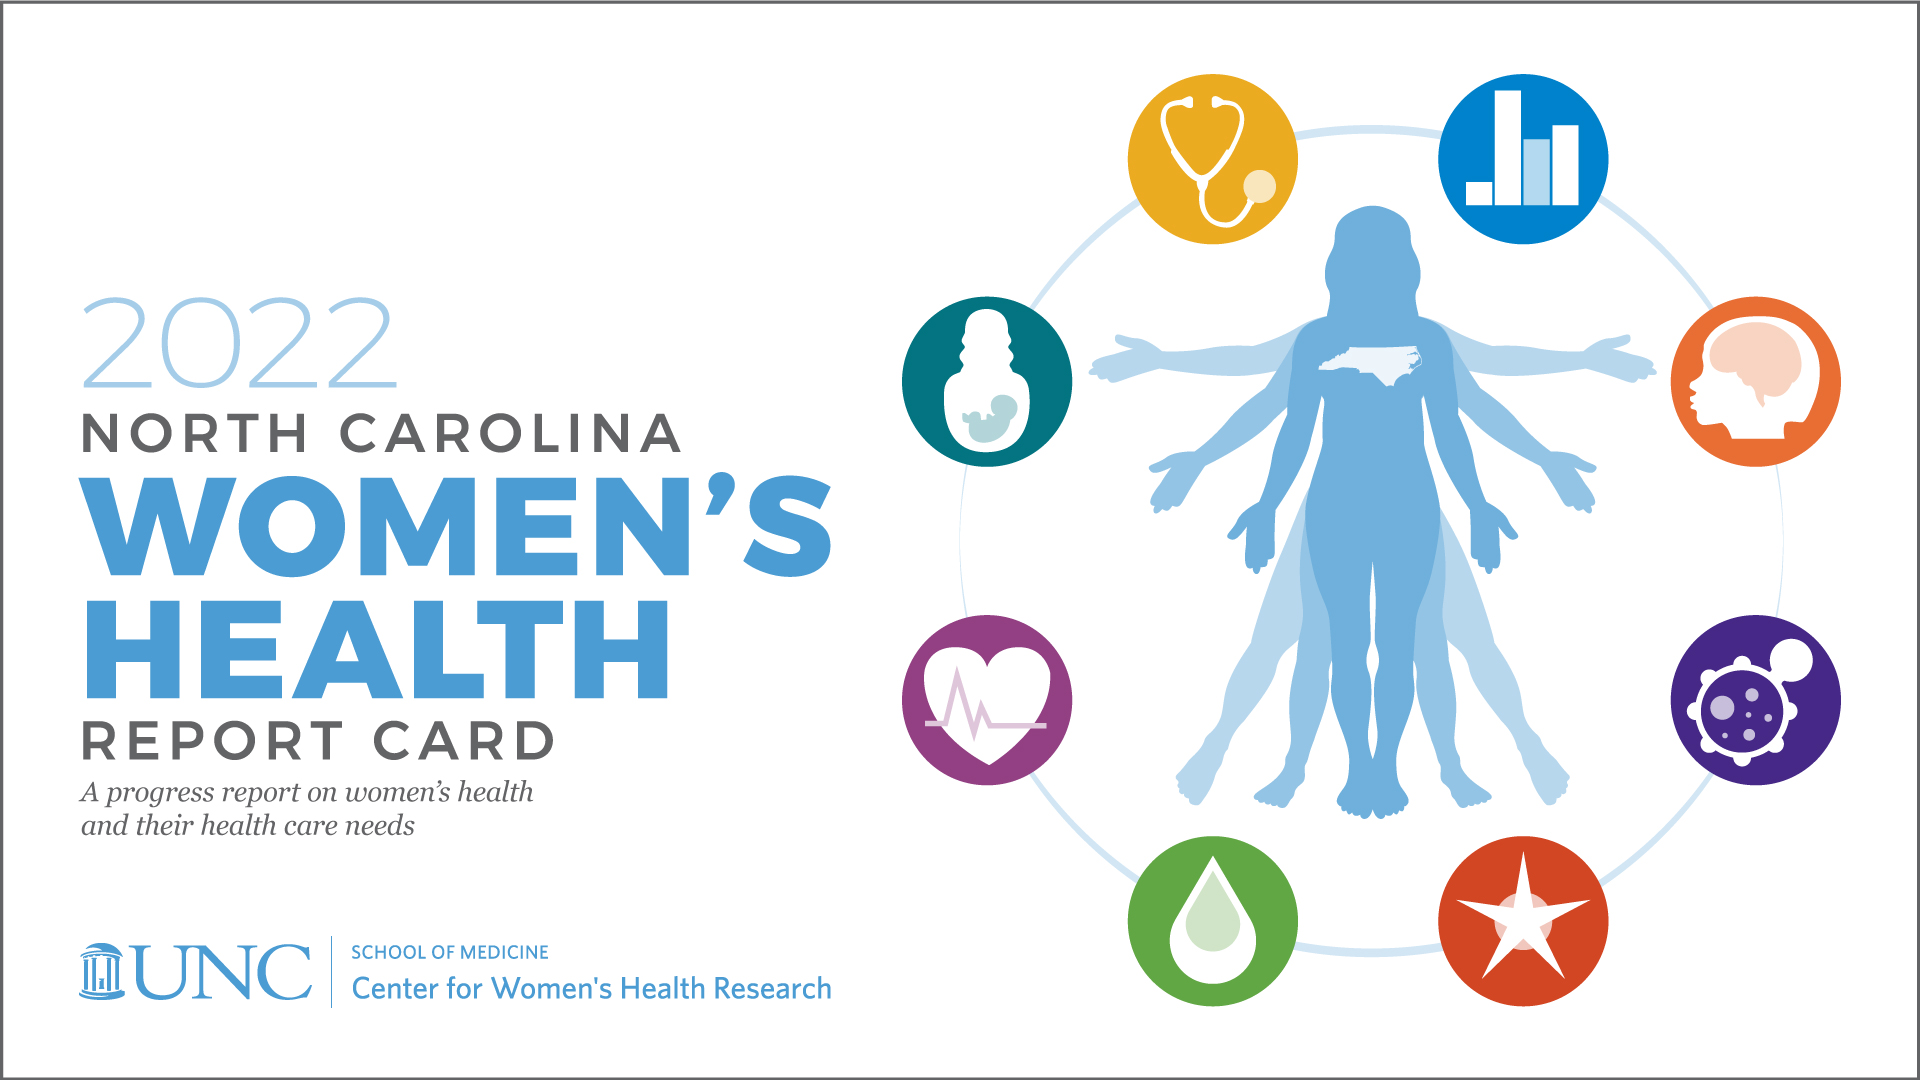  Center for Women's Health Research at UNC